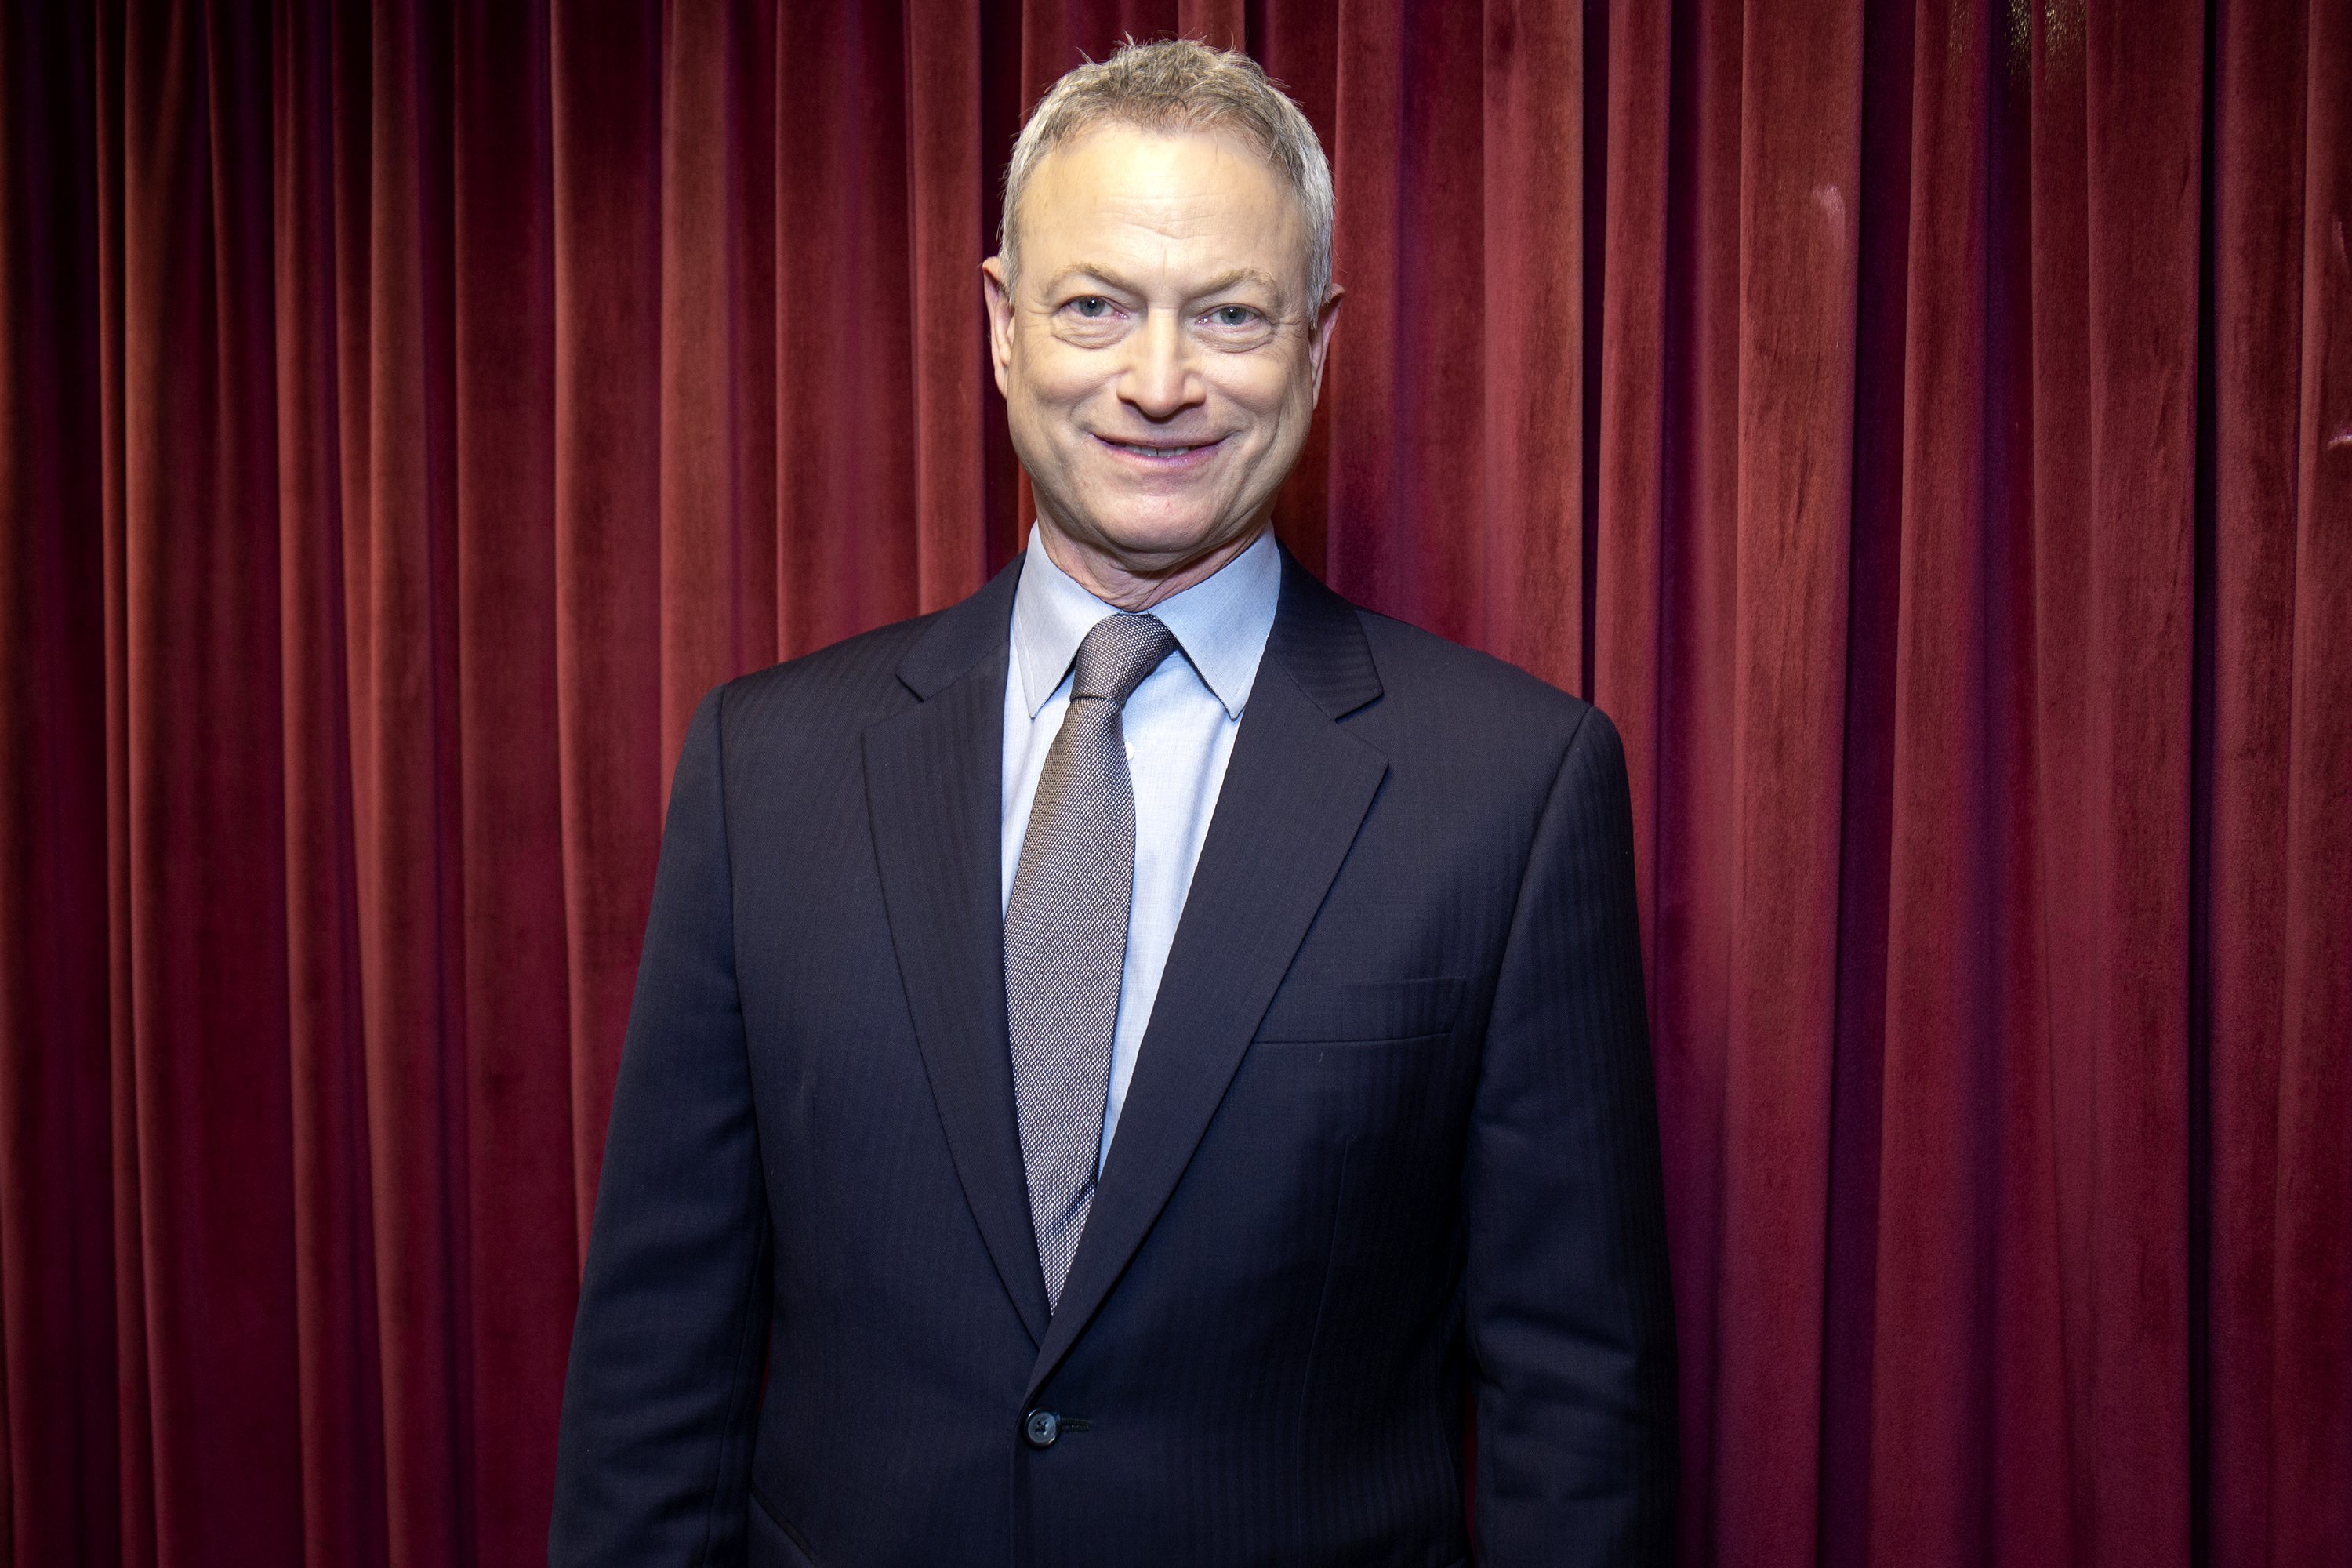 Gary Sinise visits SiriusXM Studios on February 11, 2019 in New York City. | Source: Getty Images